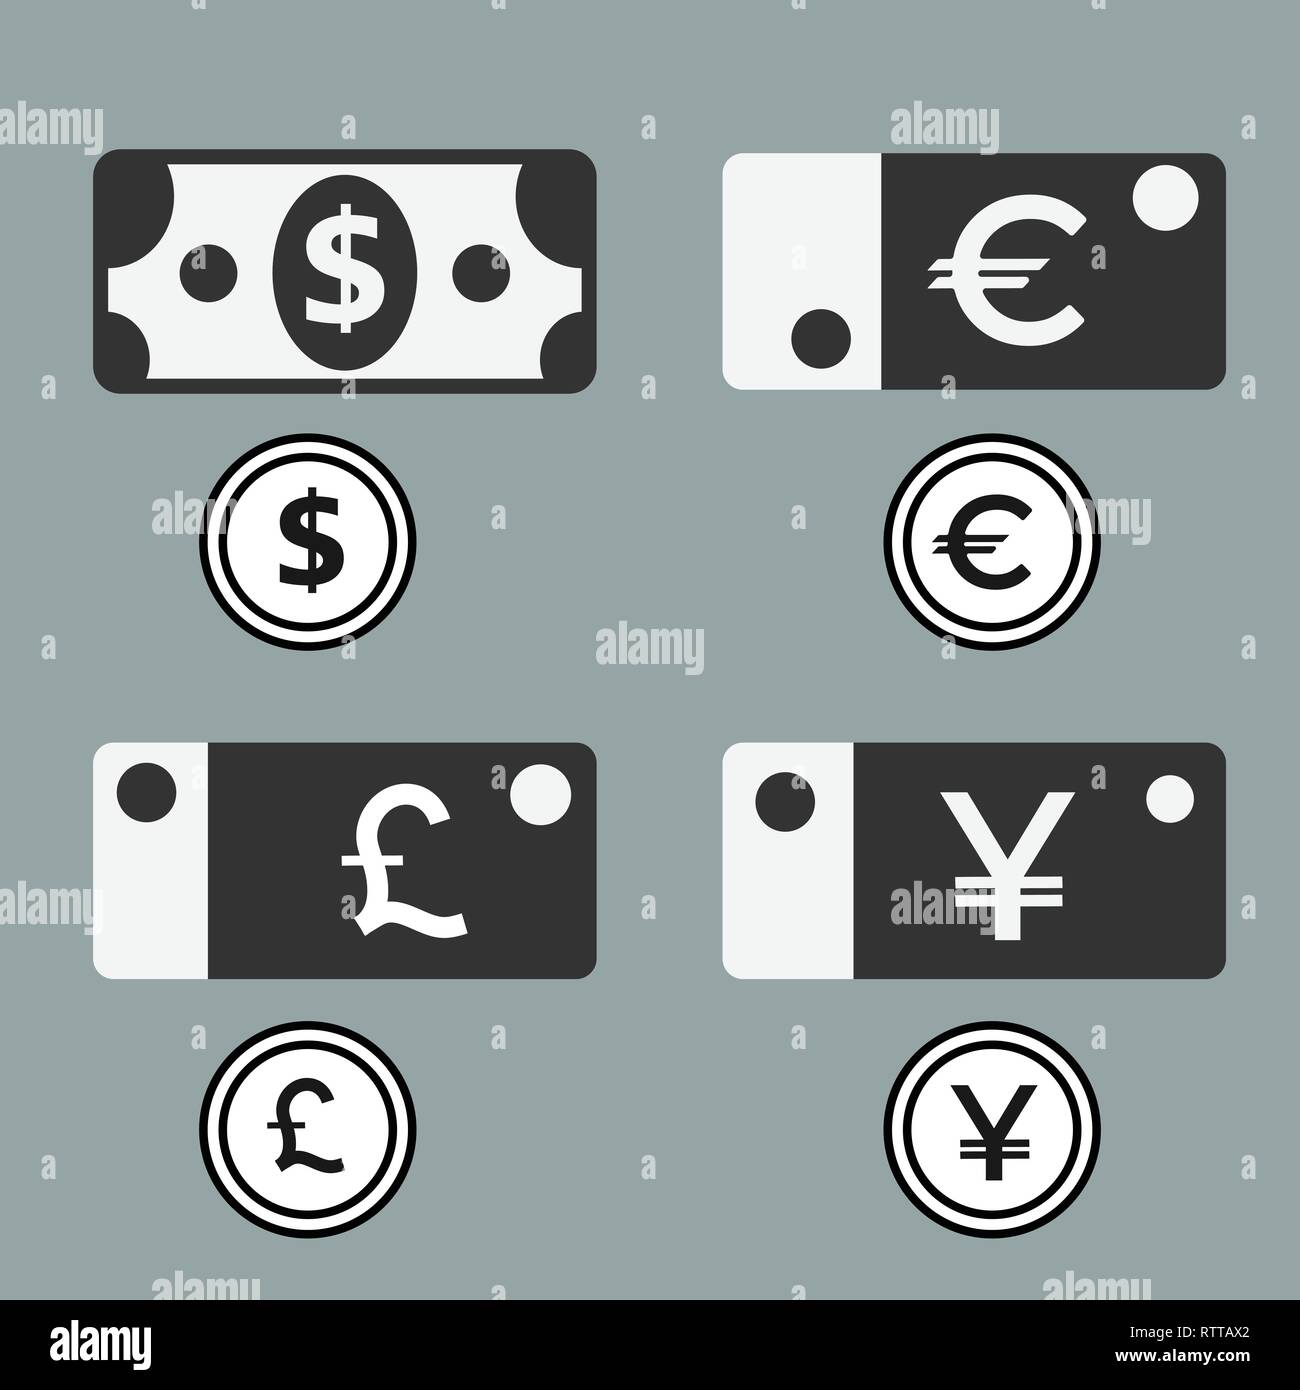 Dollar, Euro, Pound and Yuan currency icons. Paper and metal USD, EUR, GBP and CNY money sign symbols. Flat icon pointers. Stock Vector